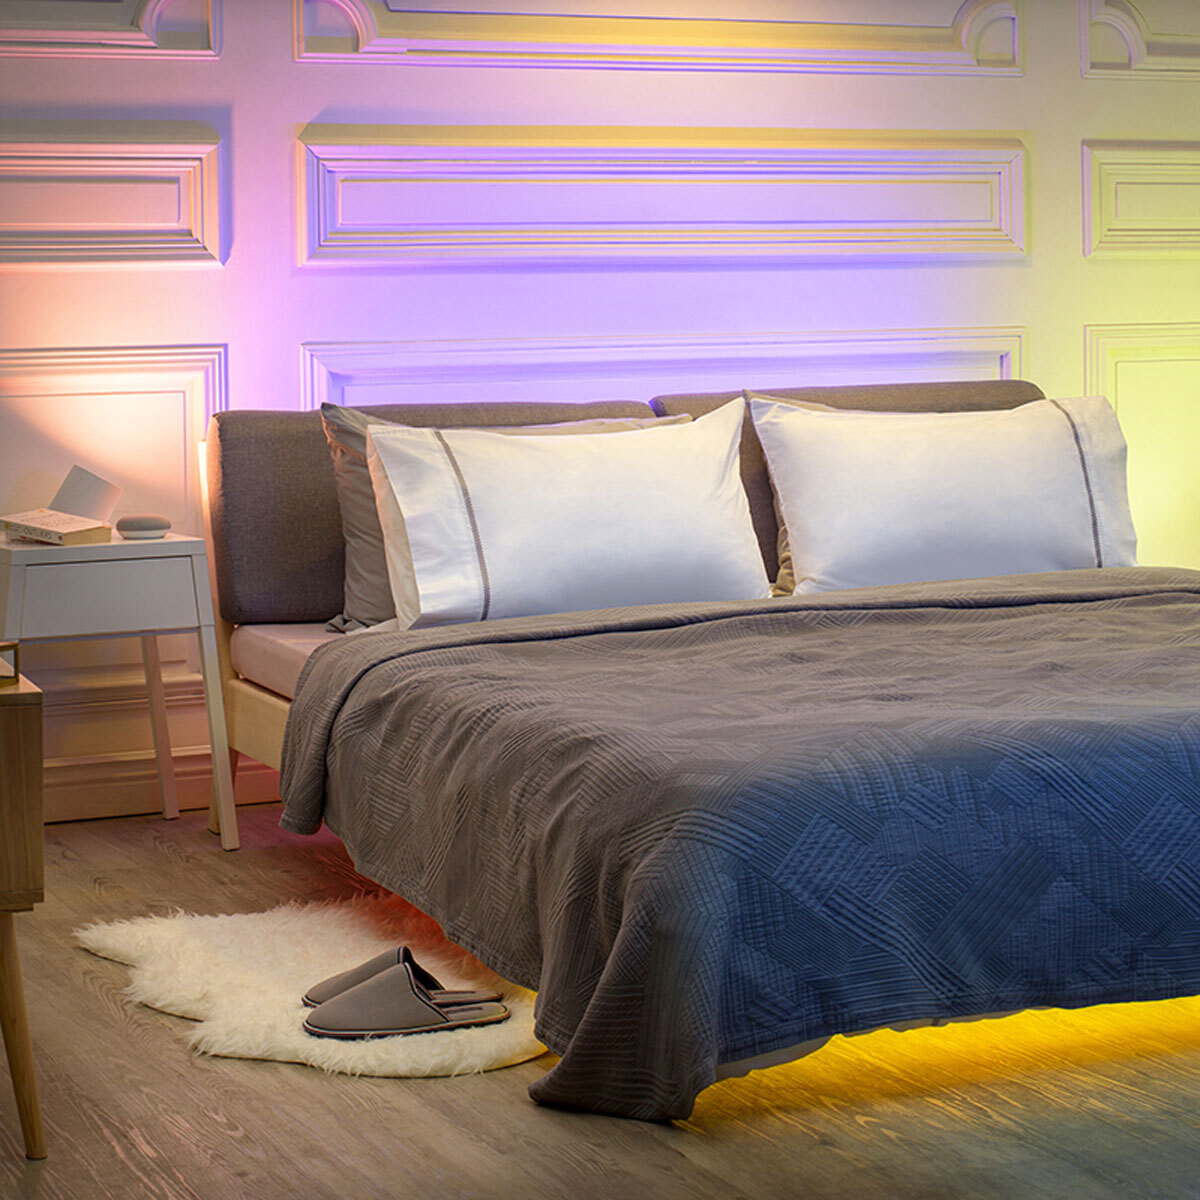 Lifestyle image of light strip in use in bedroom setting